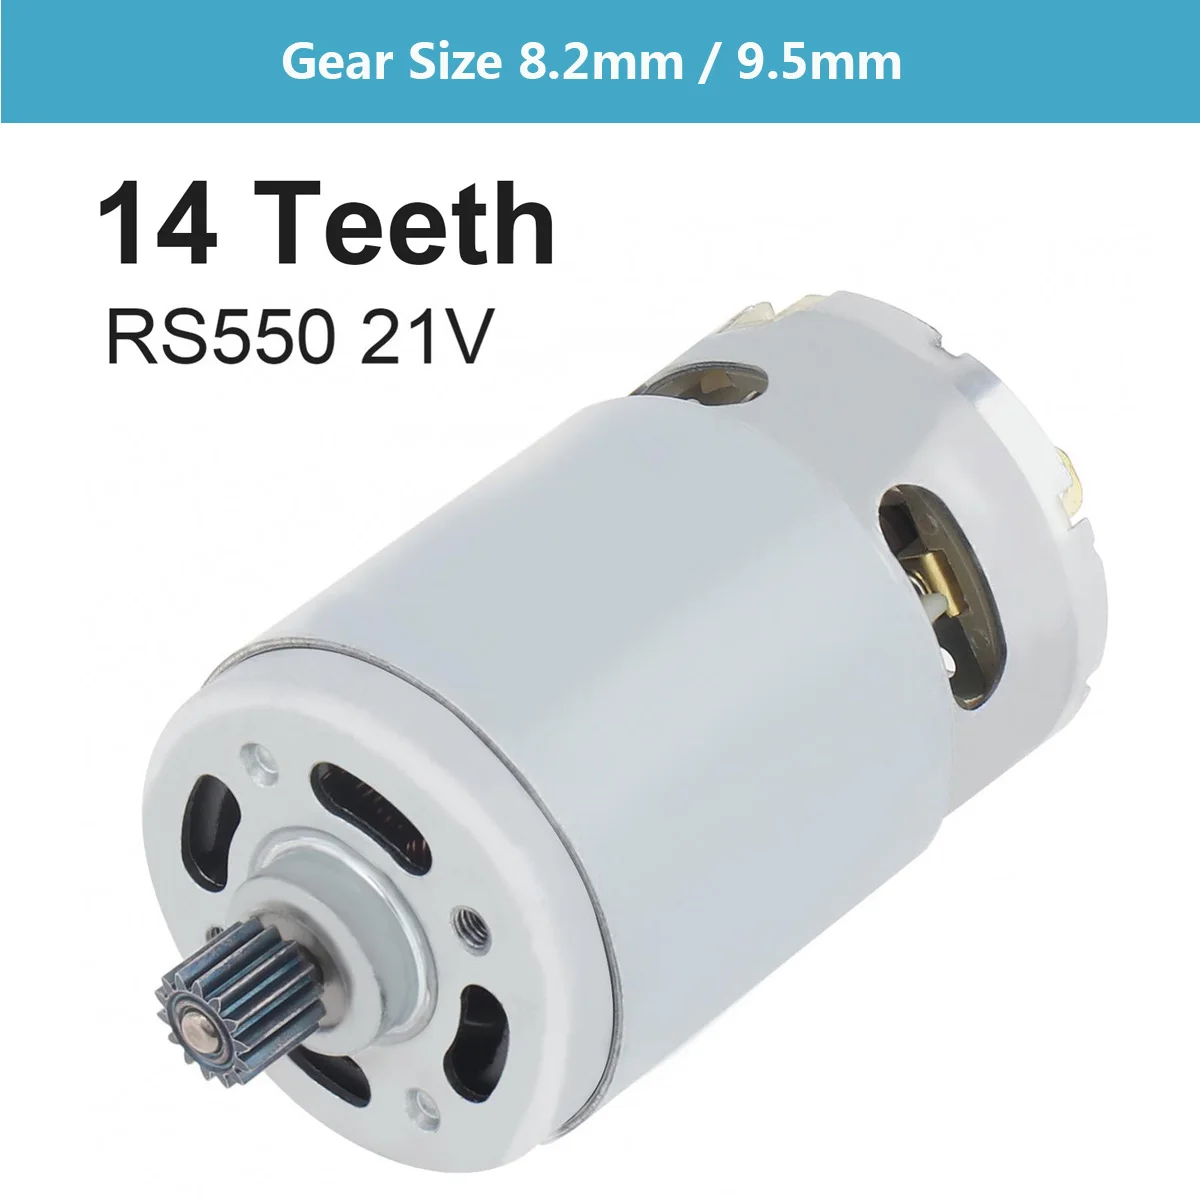 

RS550 DC Motor 8.2mm /9.5mm 14 Teeth Gear Micro Motor 21V 25000RPM Electric Saw Motor for Rechargeable Hand Saw / Electric Drill